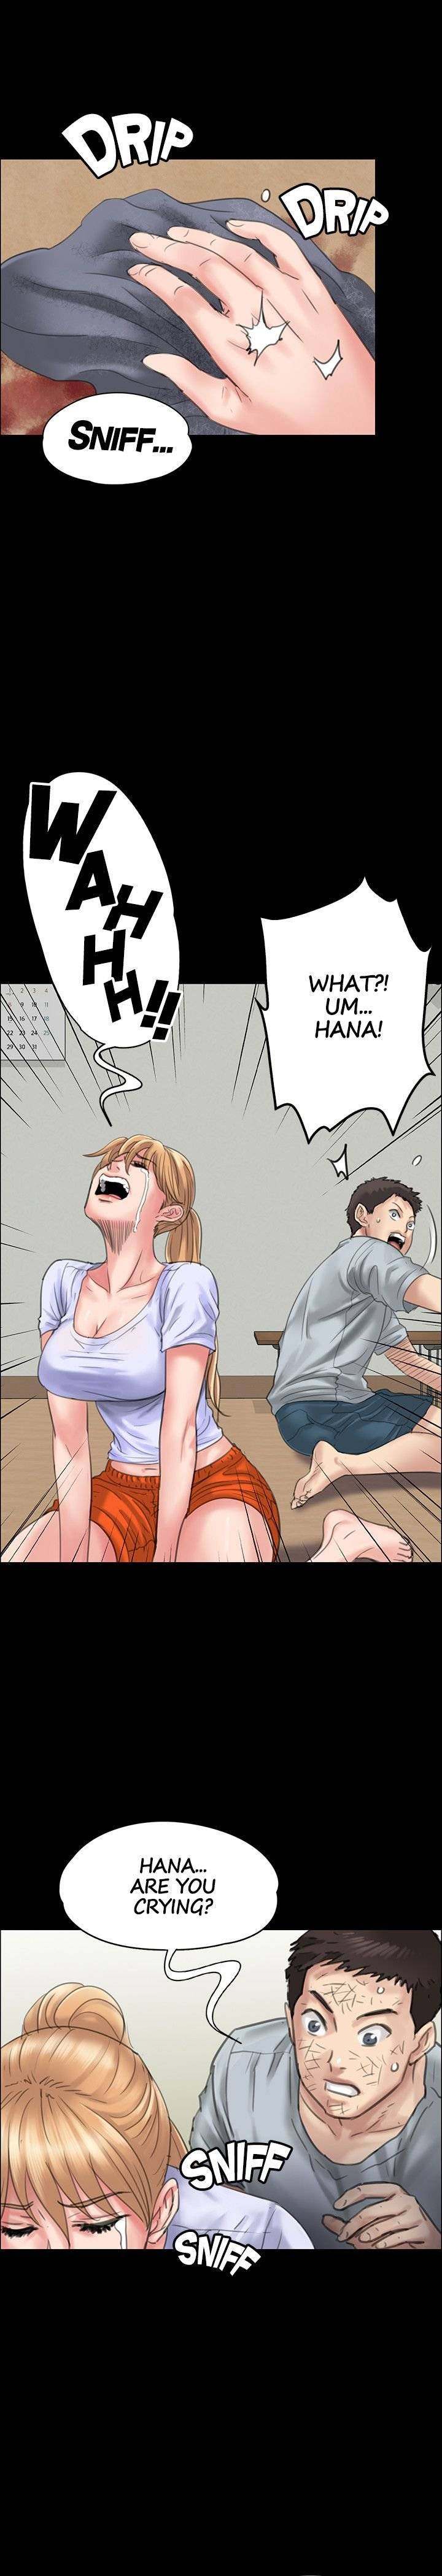 Panel Image 1 for chapter 22 of manhwa Queen Bee on read.oppai.stream